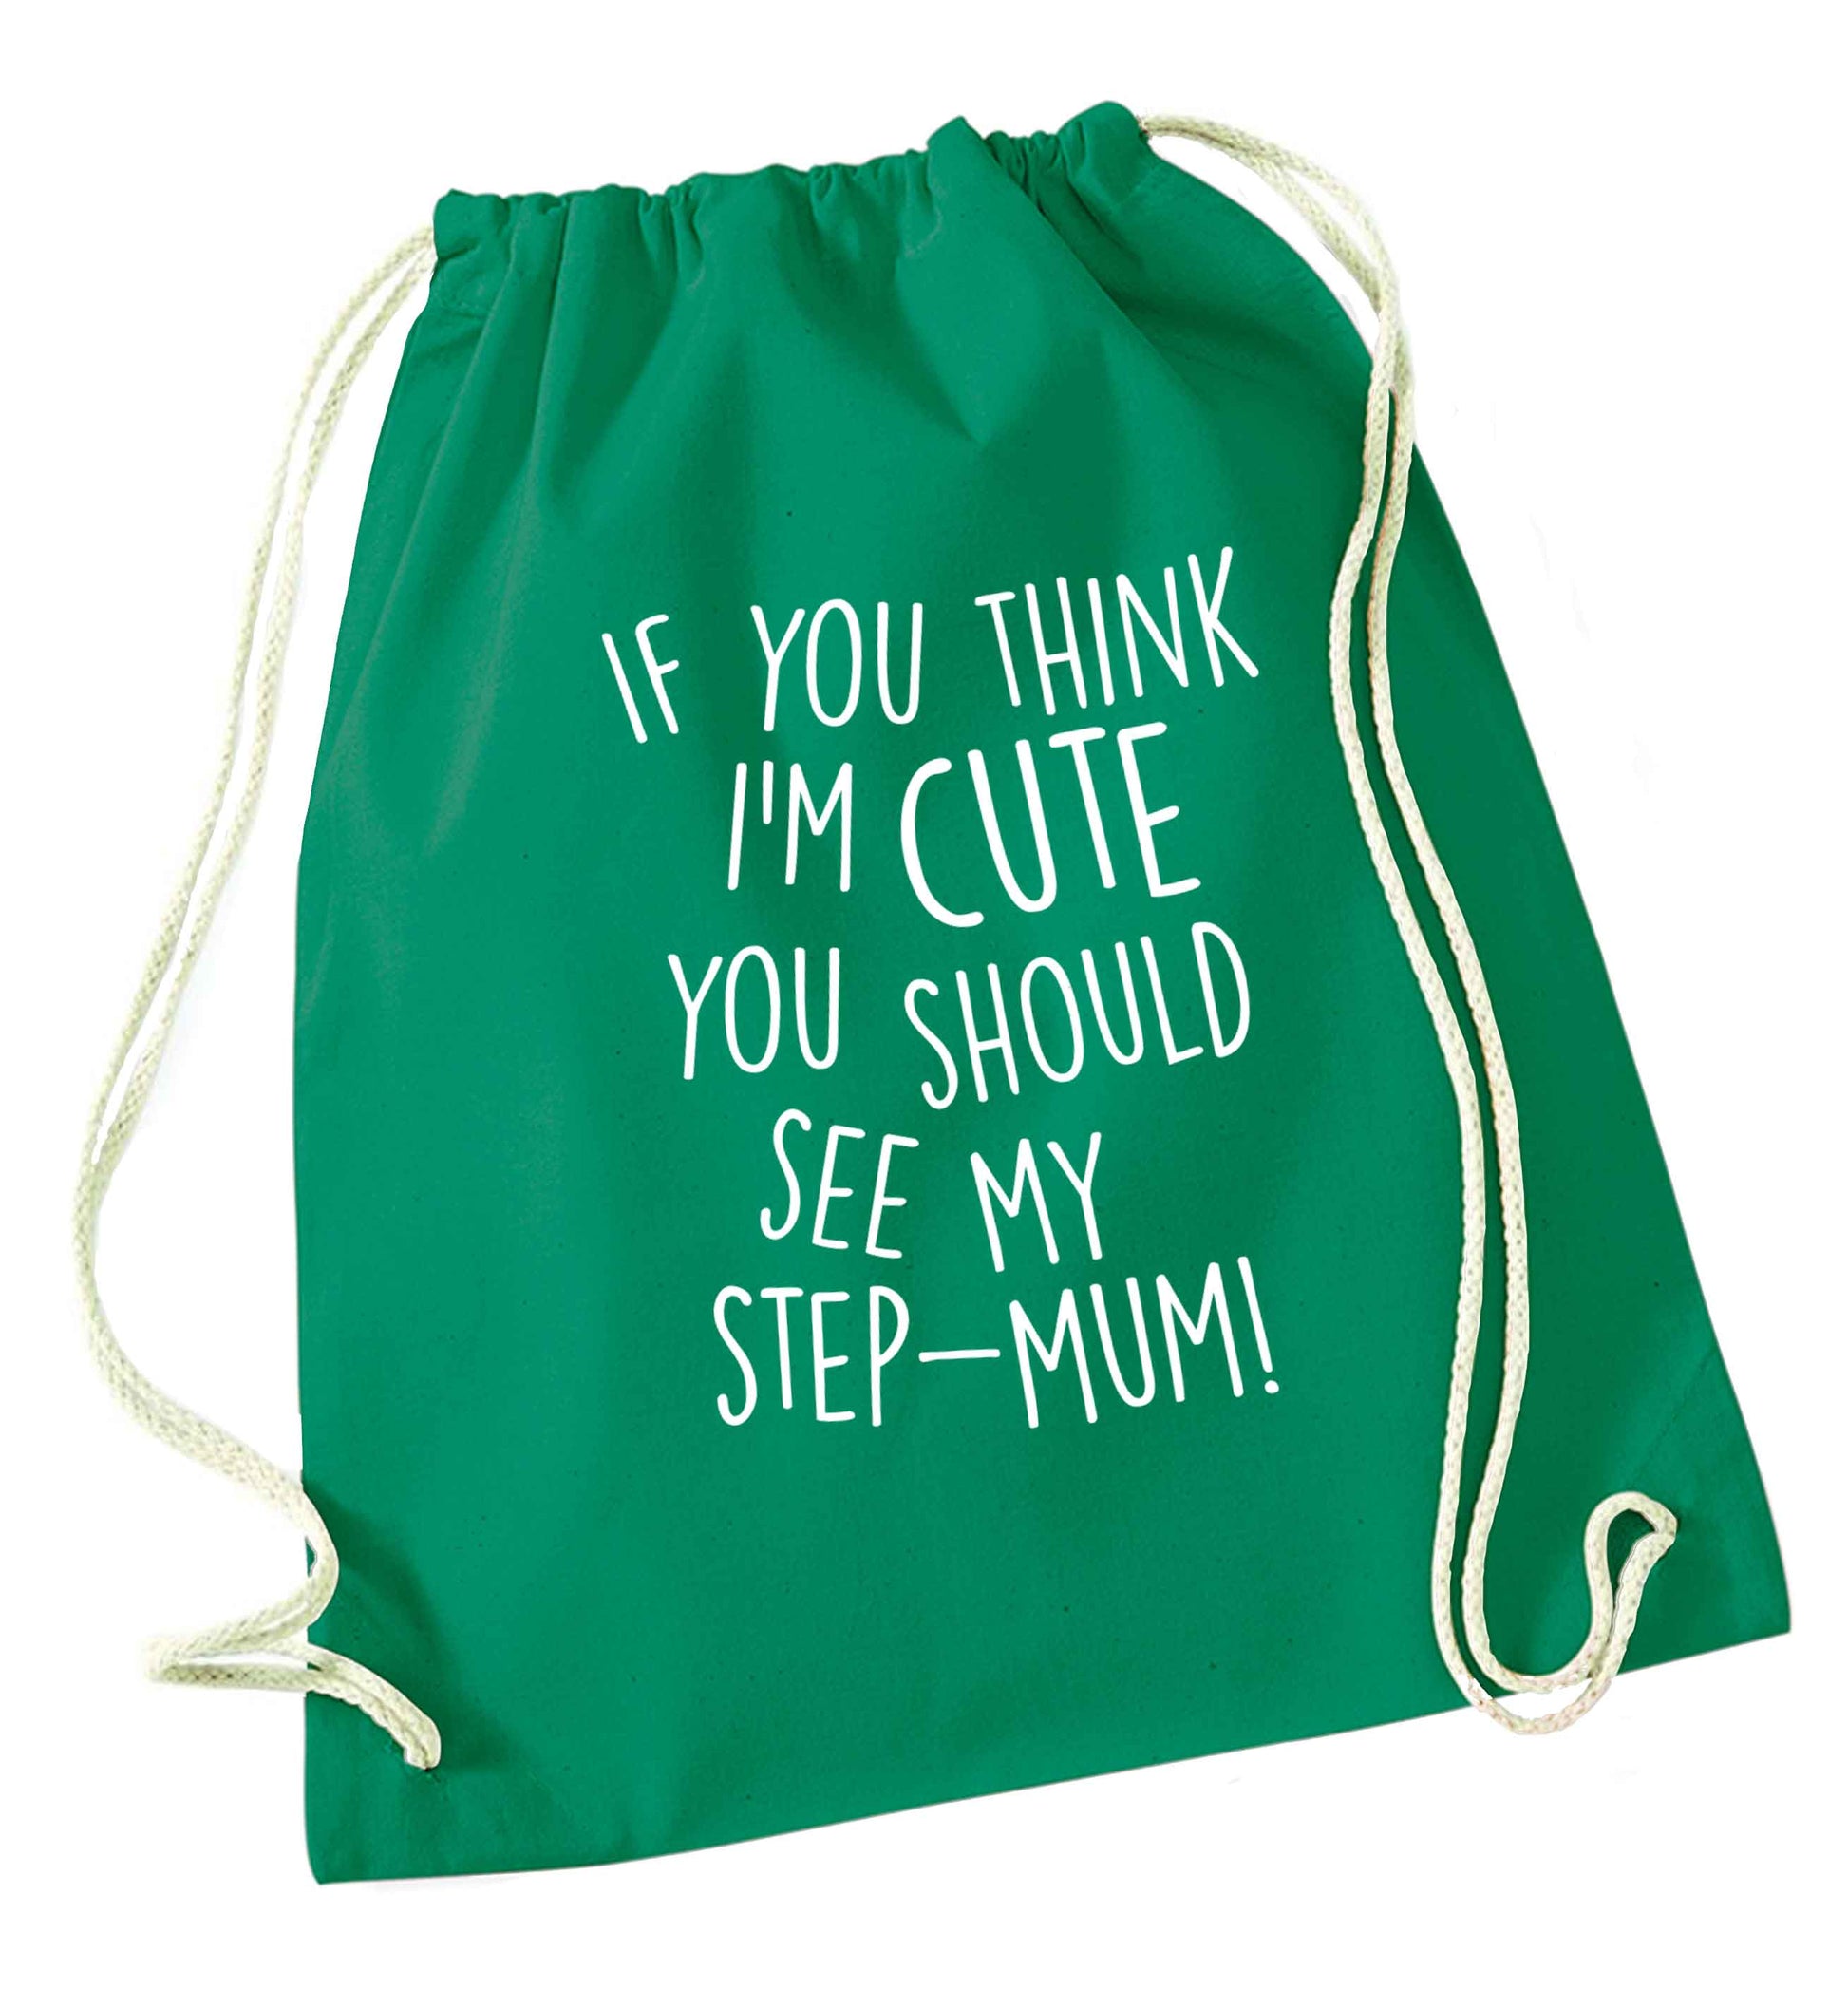 My step-mum loves me to the moon and back green drawstring bag